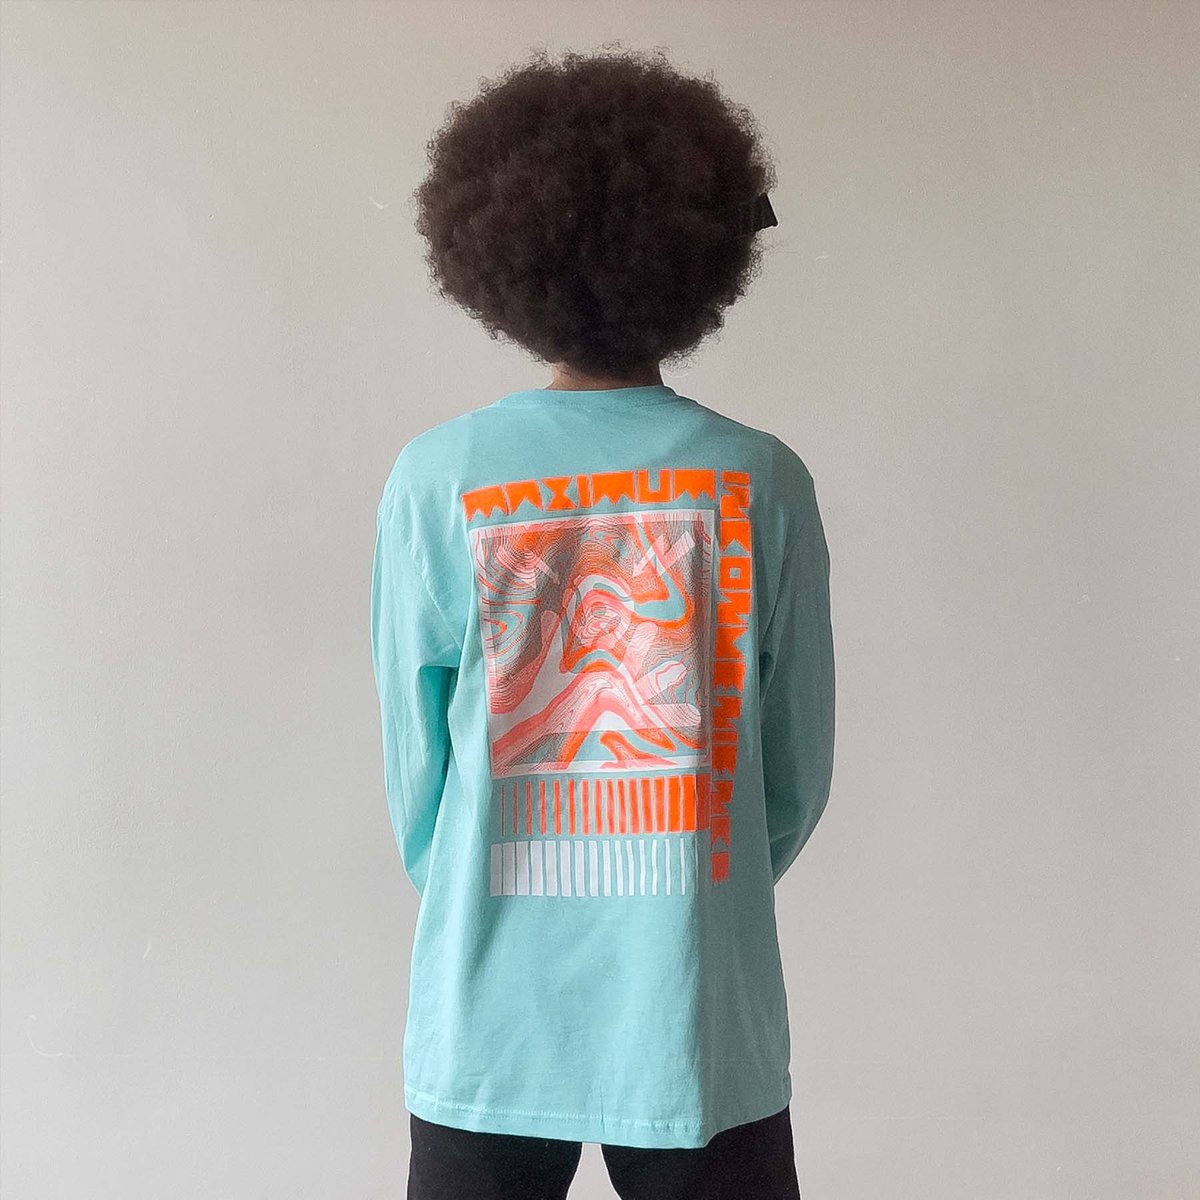 Image of Maximum Inconvenience Long Sleeve T-Shirt in Celadon Blue